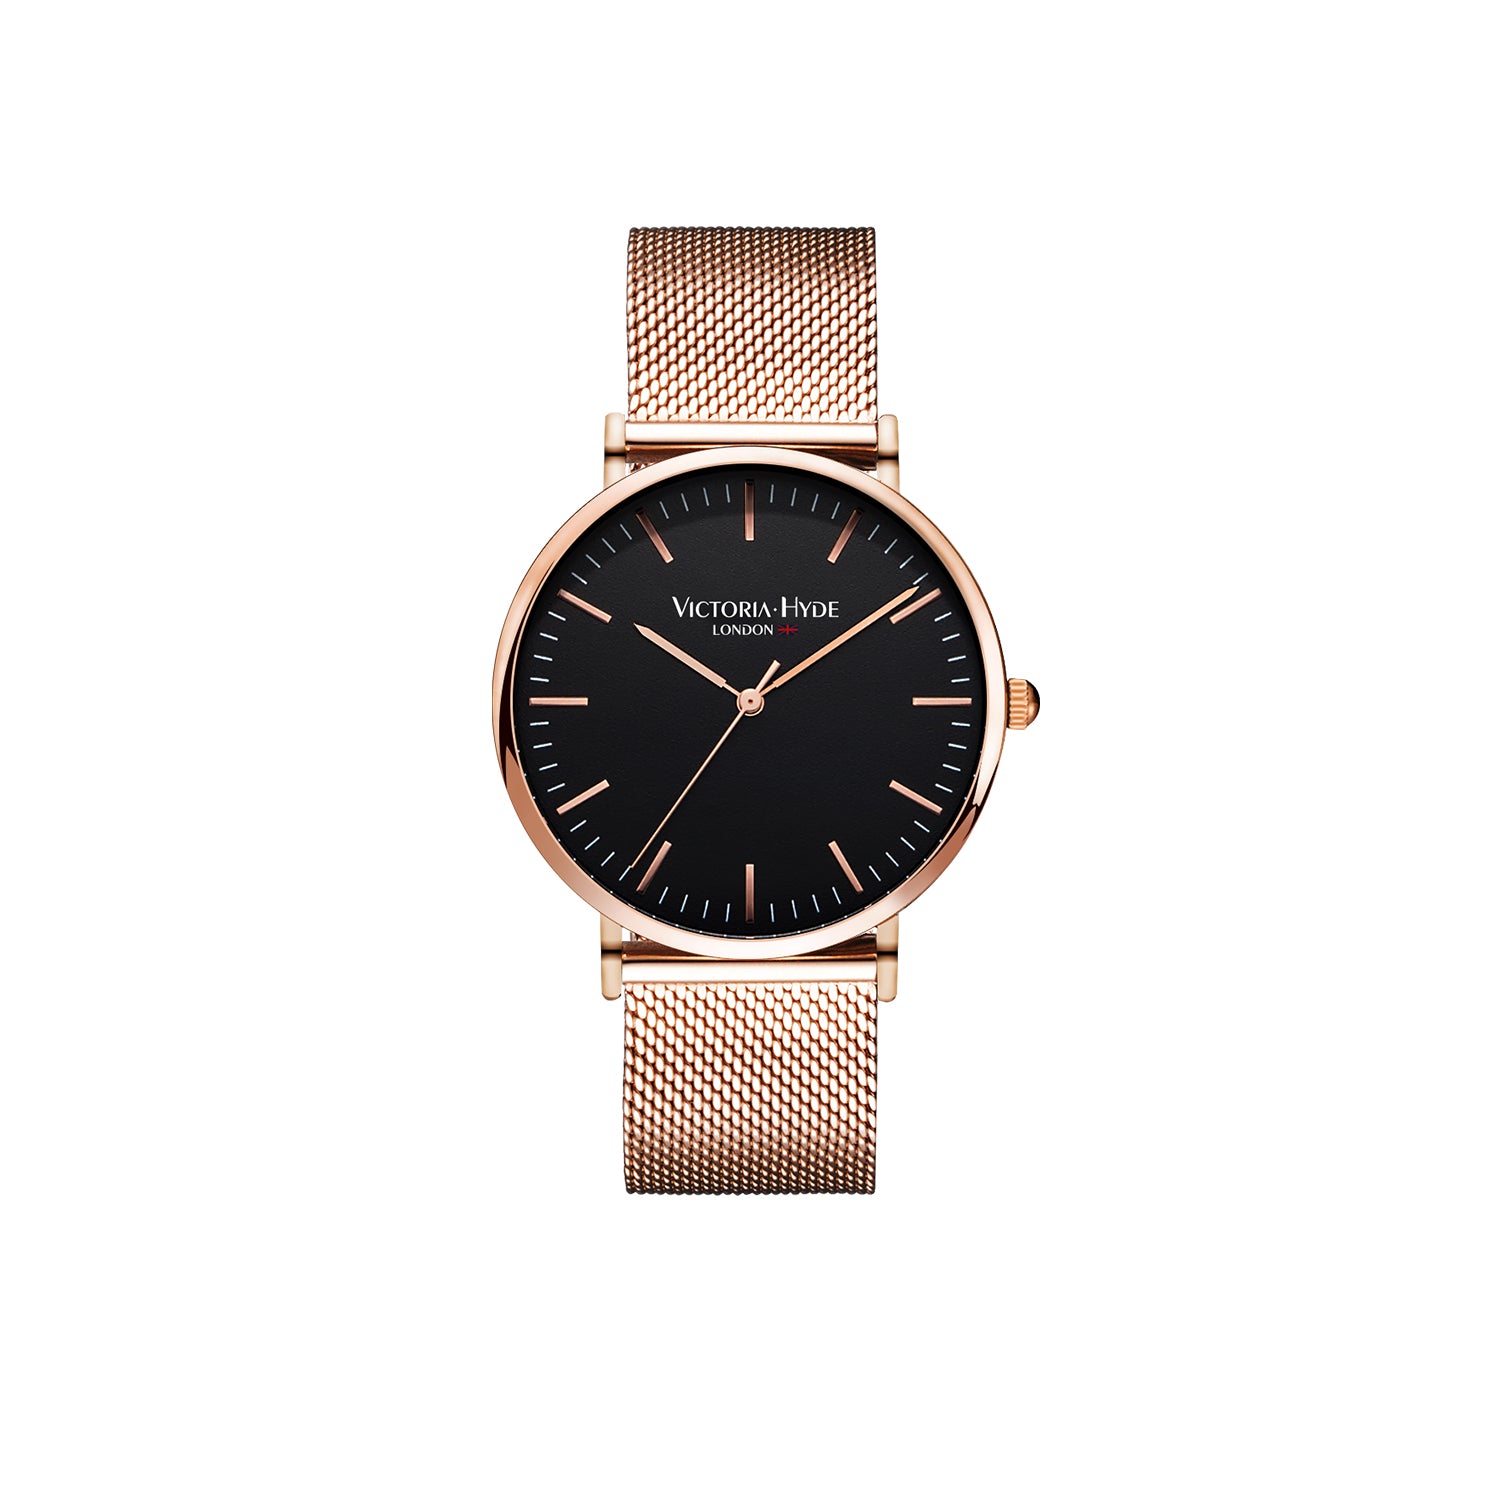 The City Collection watch in rose gold